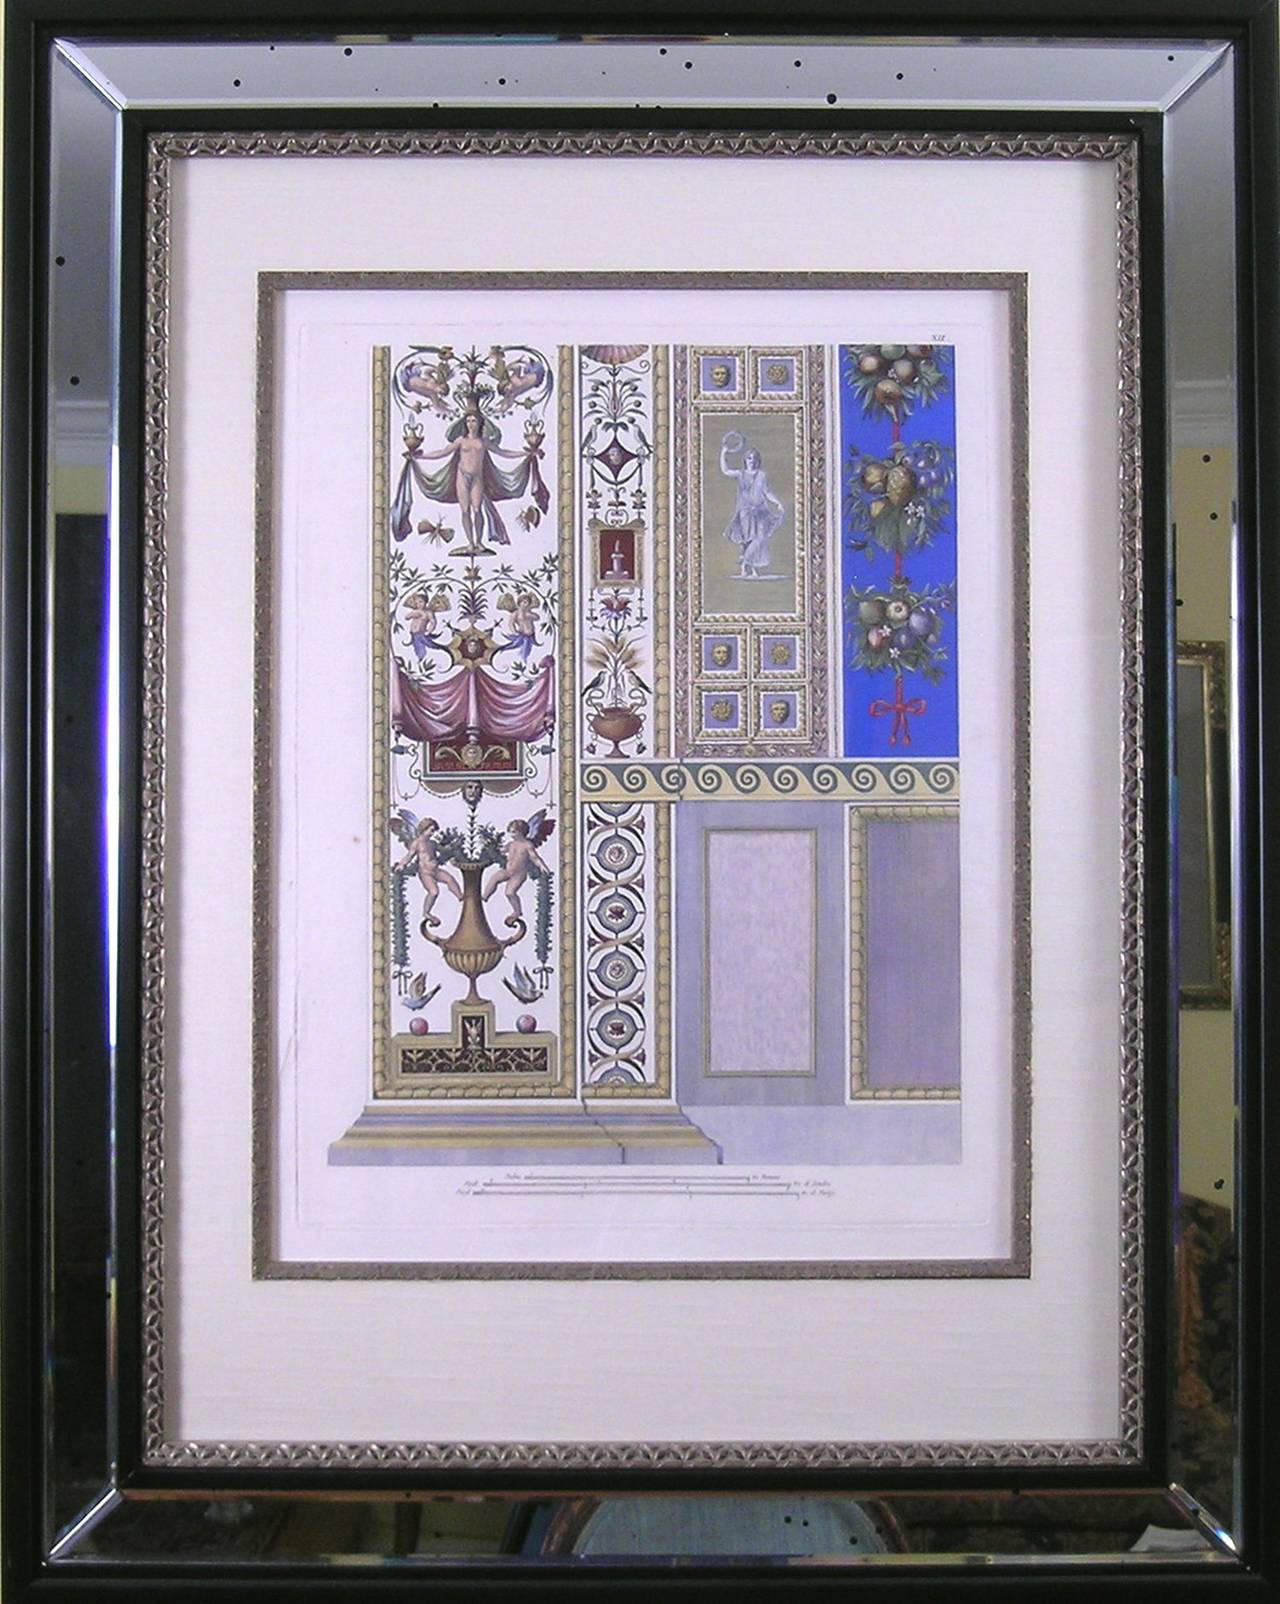 Raphael's Loggia  Plate XII. Pilaster Bottom. Priced as a pair with Pilaster Top - Print by Gaetano Savorelli